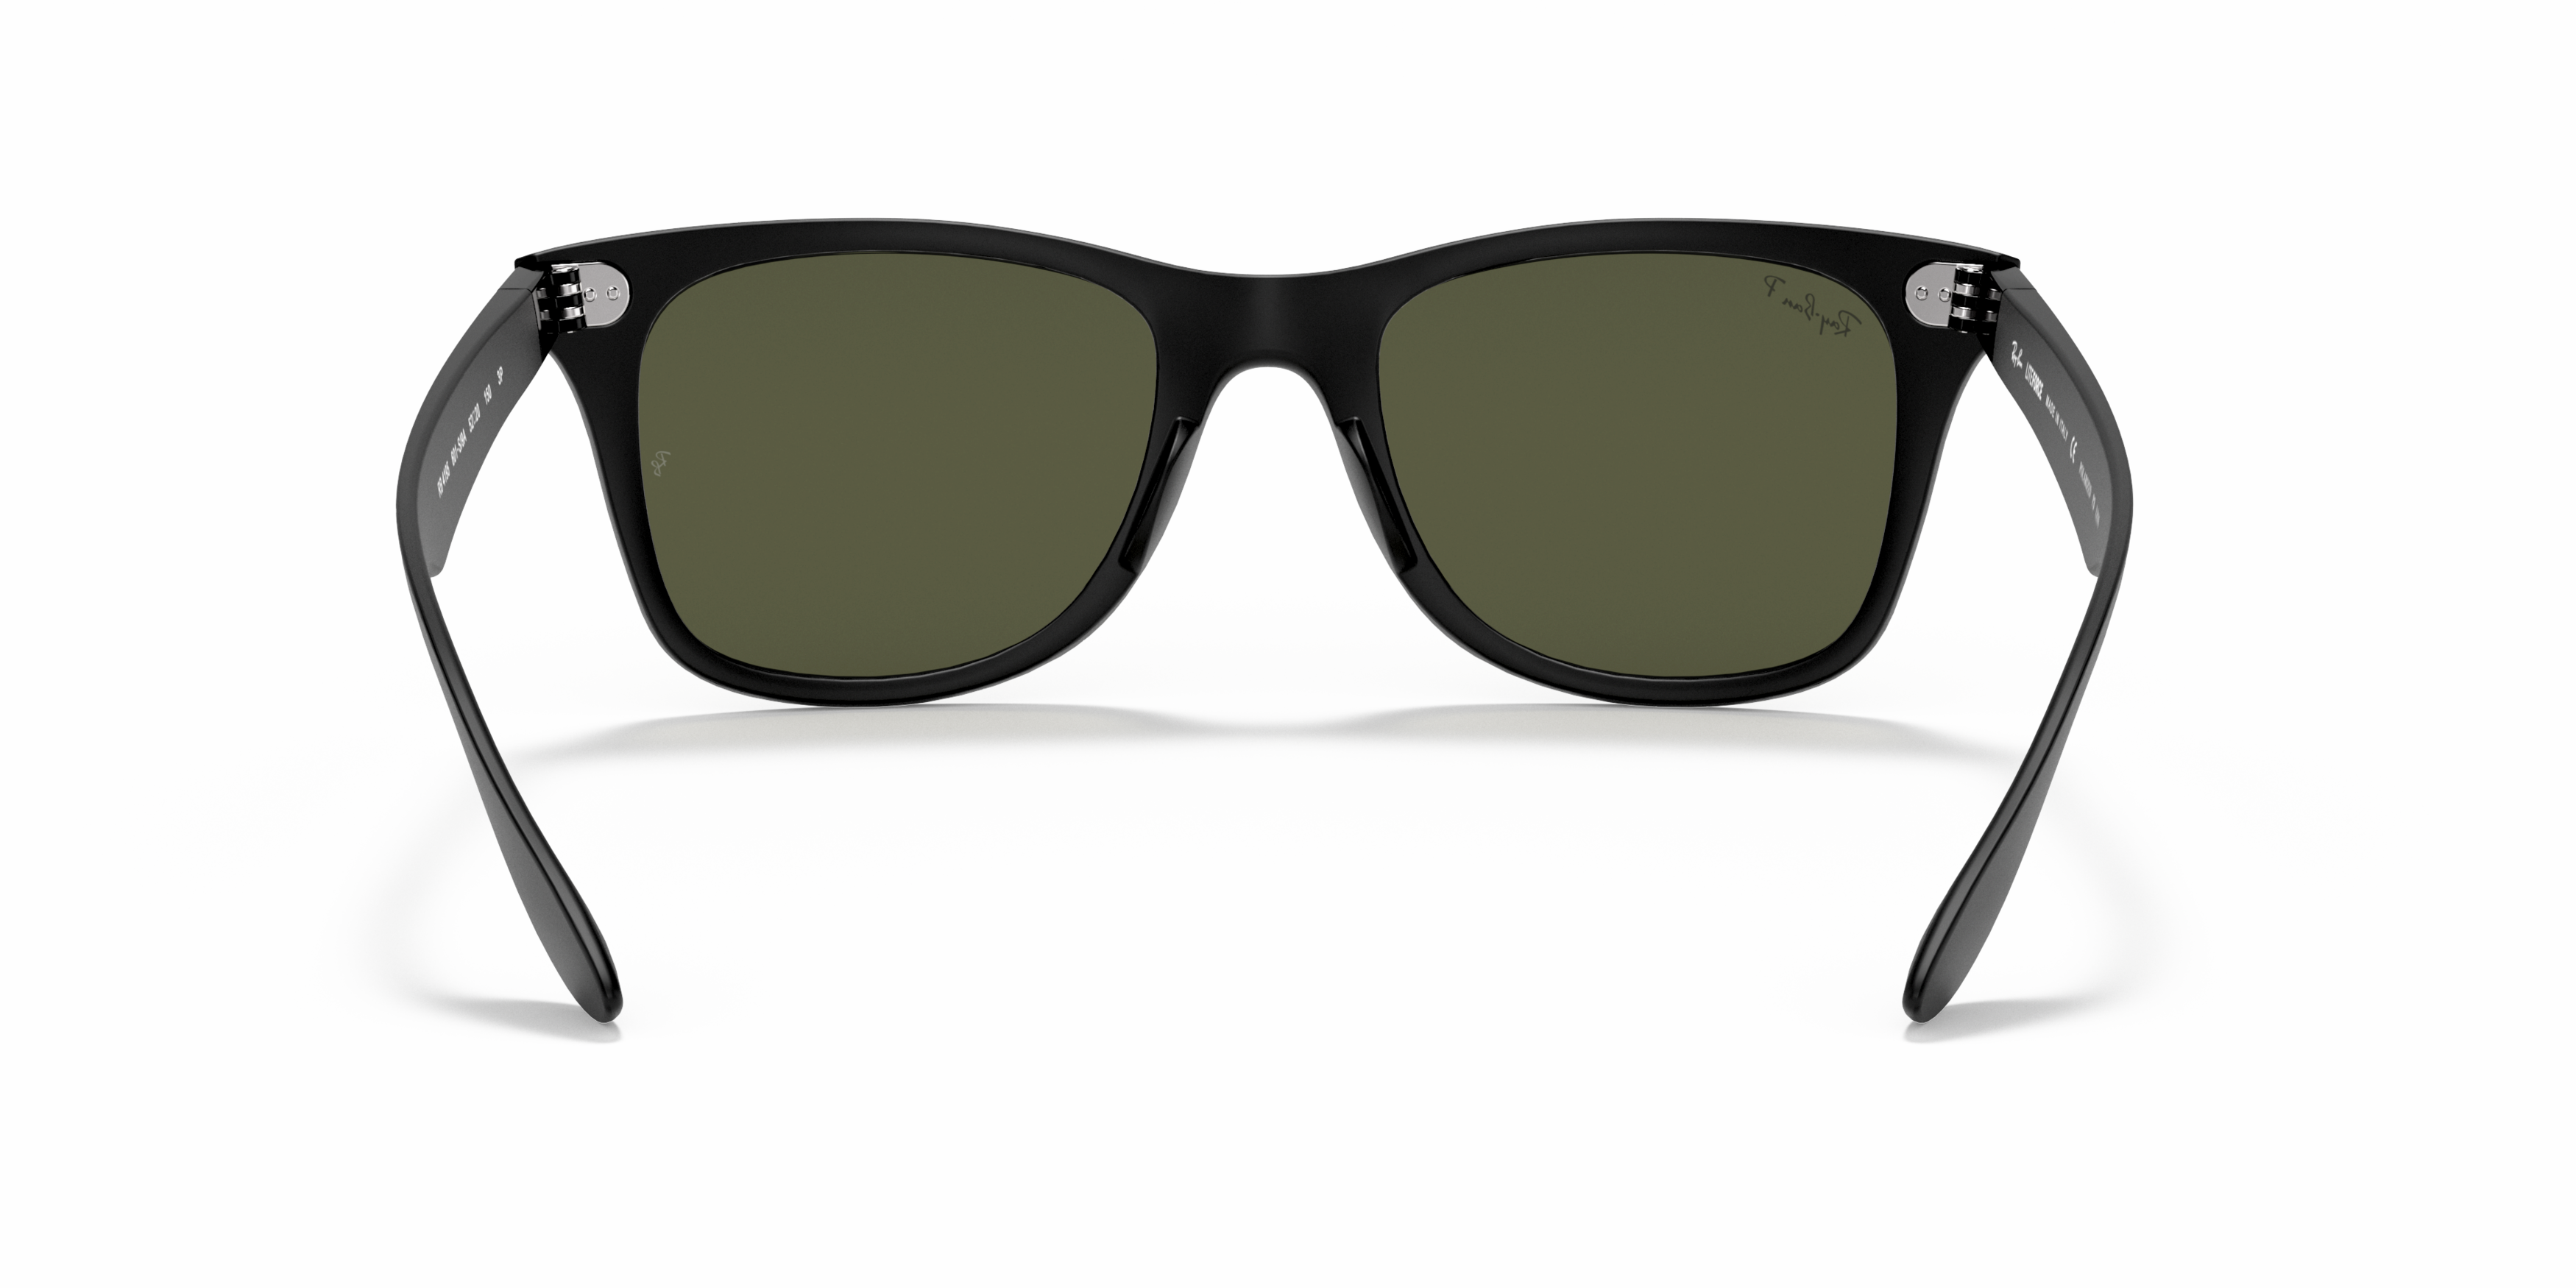 [products.image.detail02] Ray-Ban Wayfarer Liteforce 0RB4195 601S9A